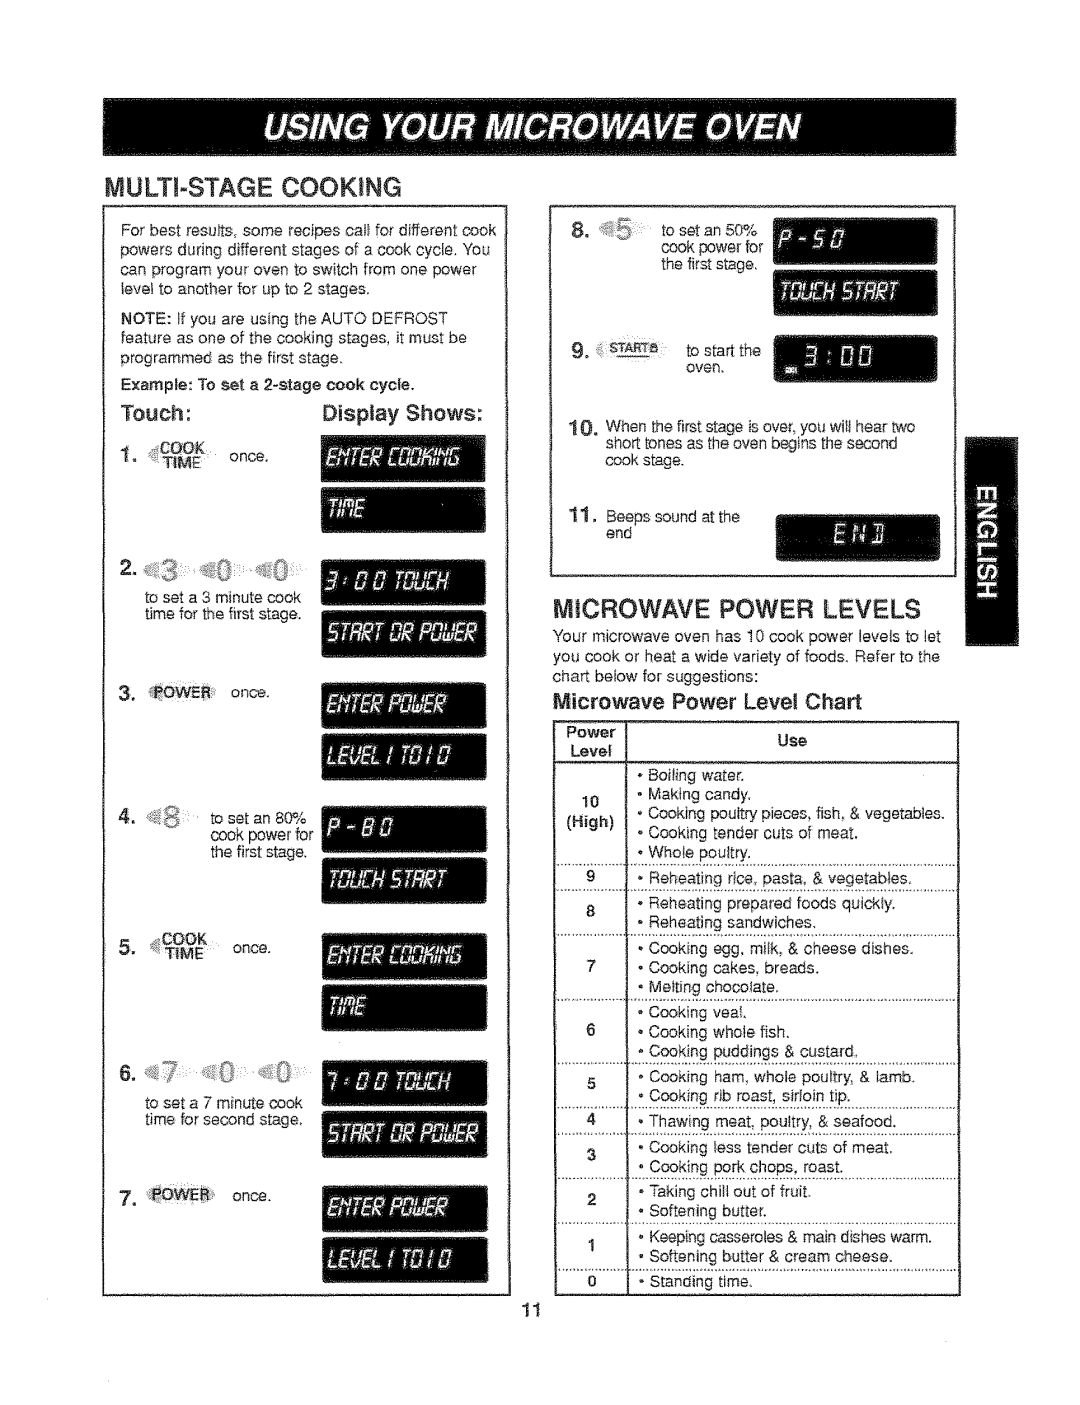 Kenmore 721.61282 manual Multf,Stage Cooking, Microwave Power Levels, 3._i_OWE_once, Microwave Power Level Chart, Touch 